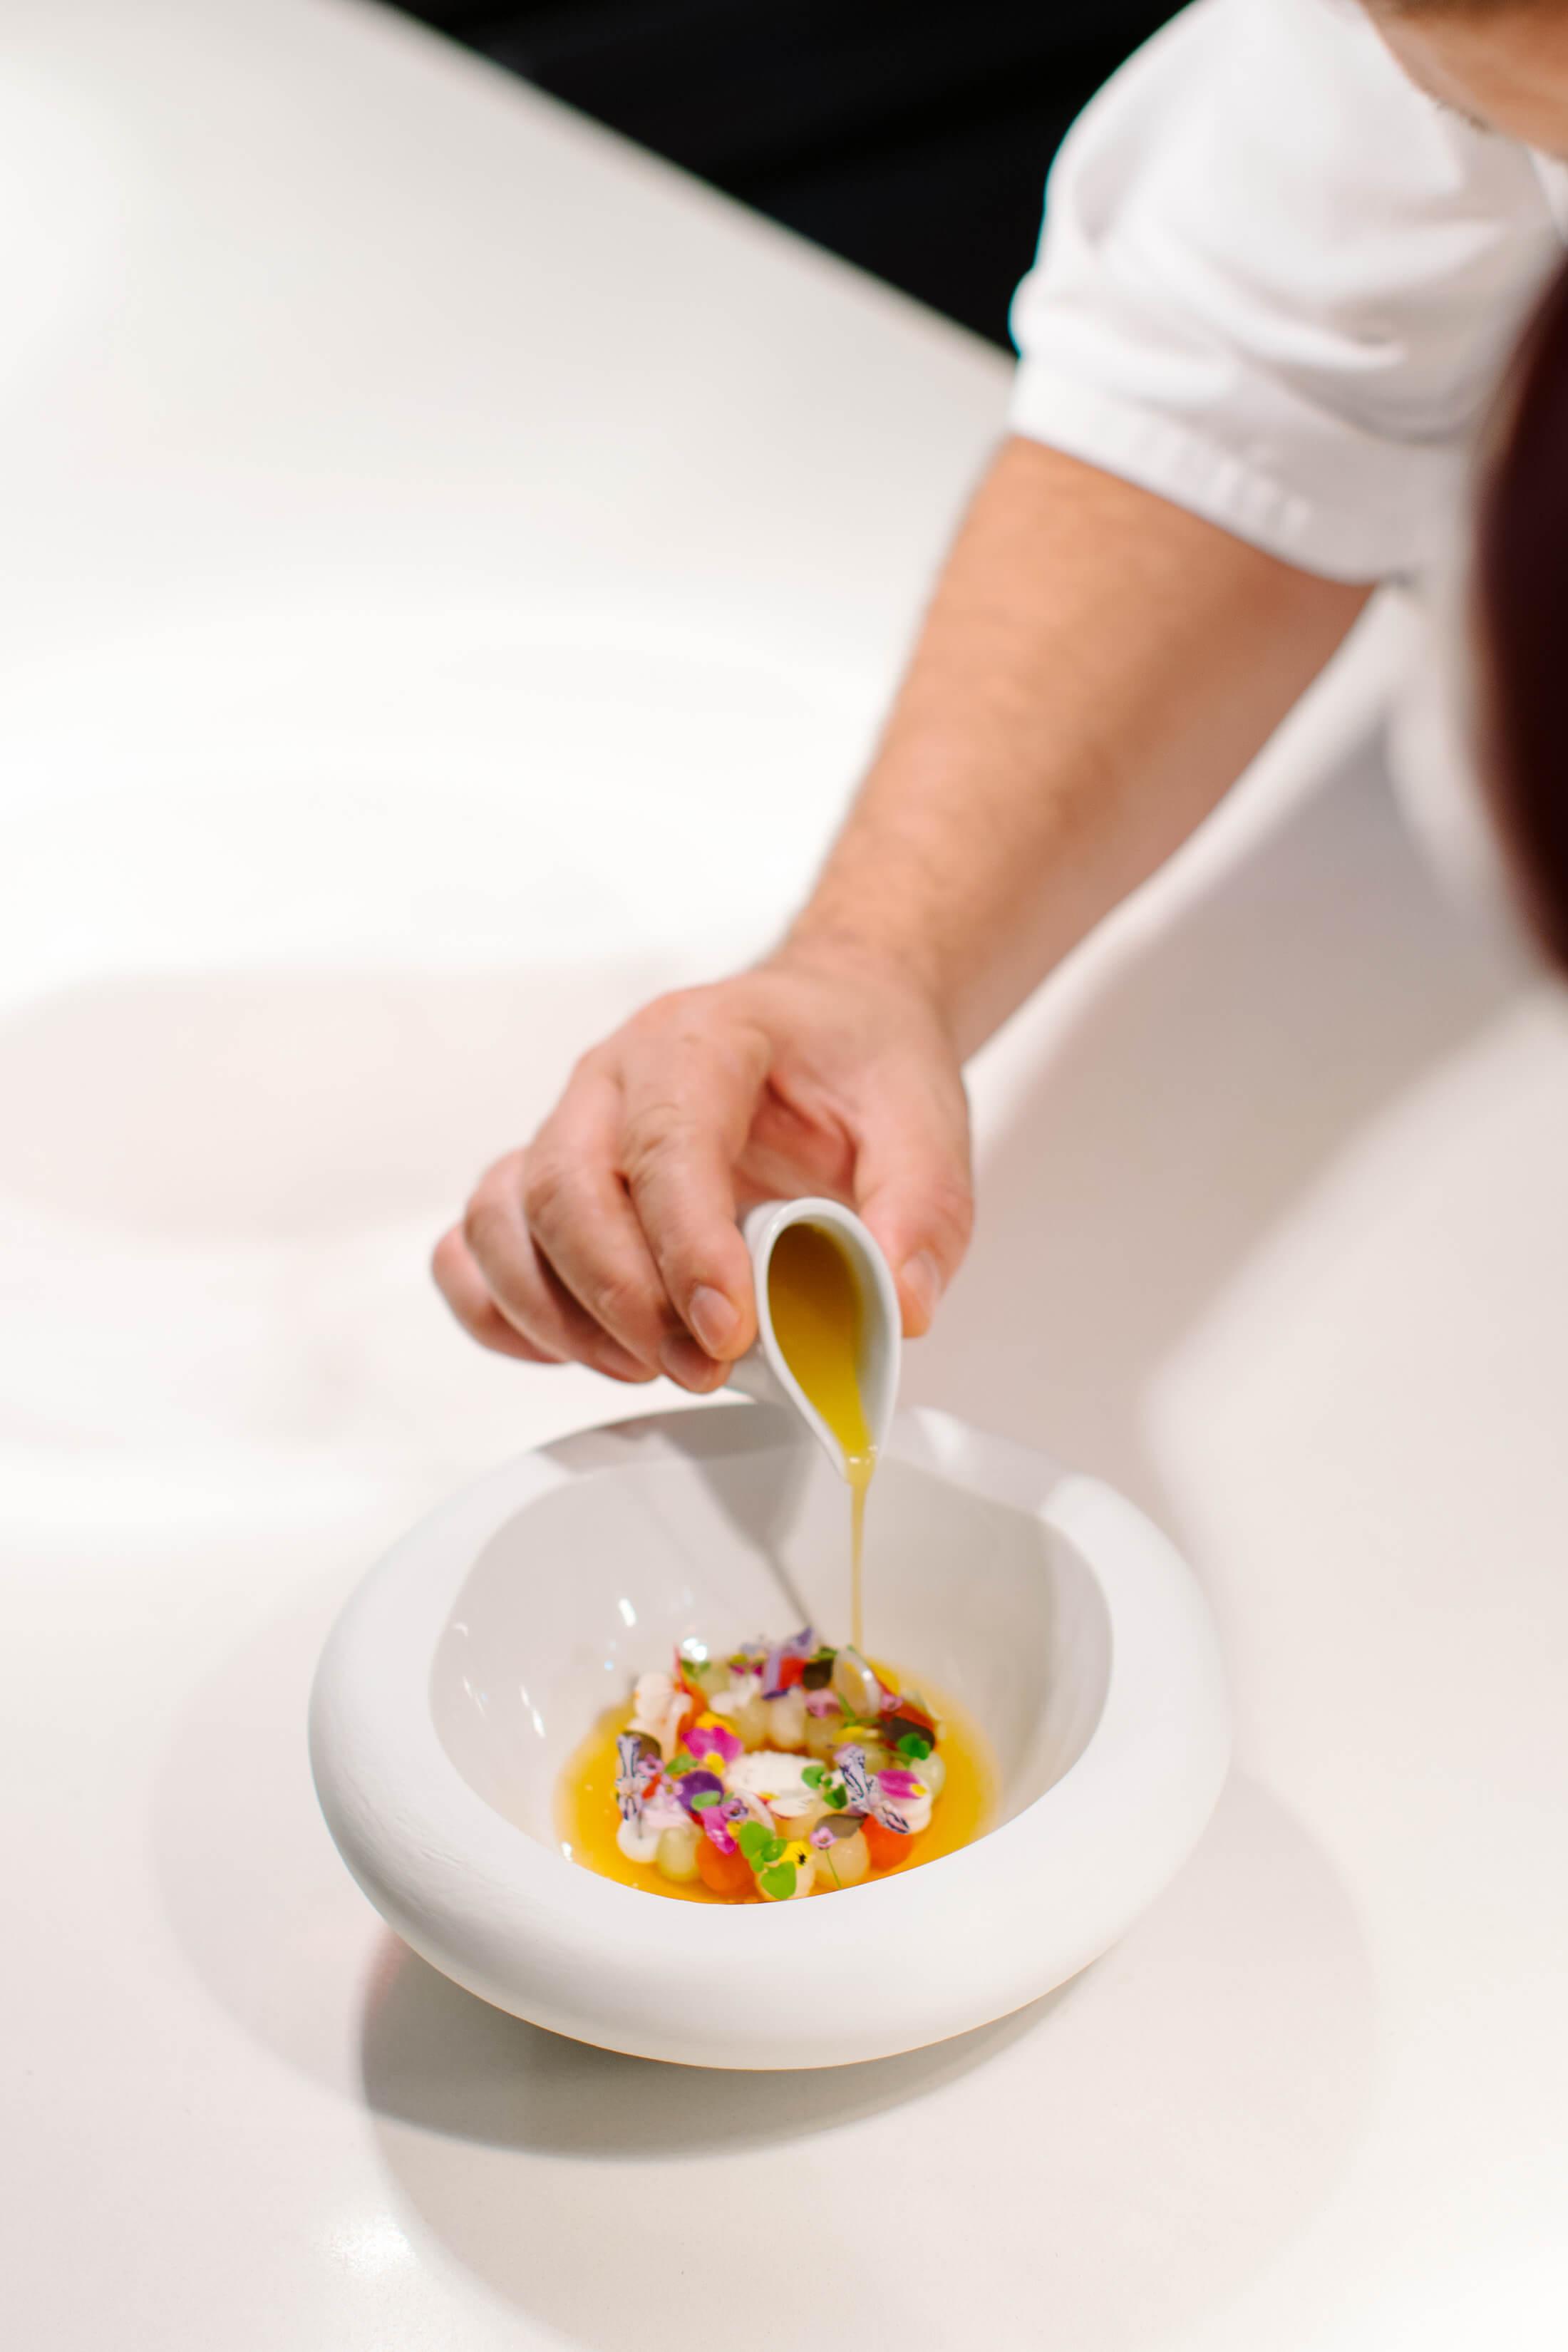 A dish being plated at Le Chique